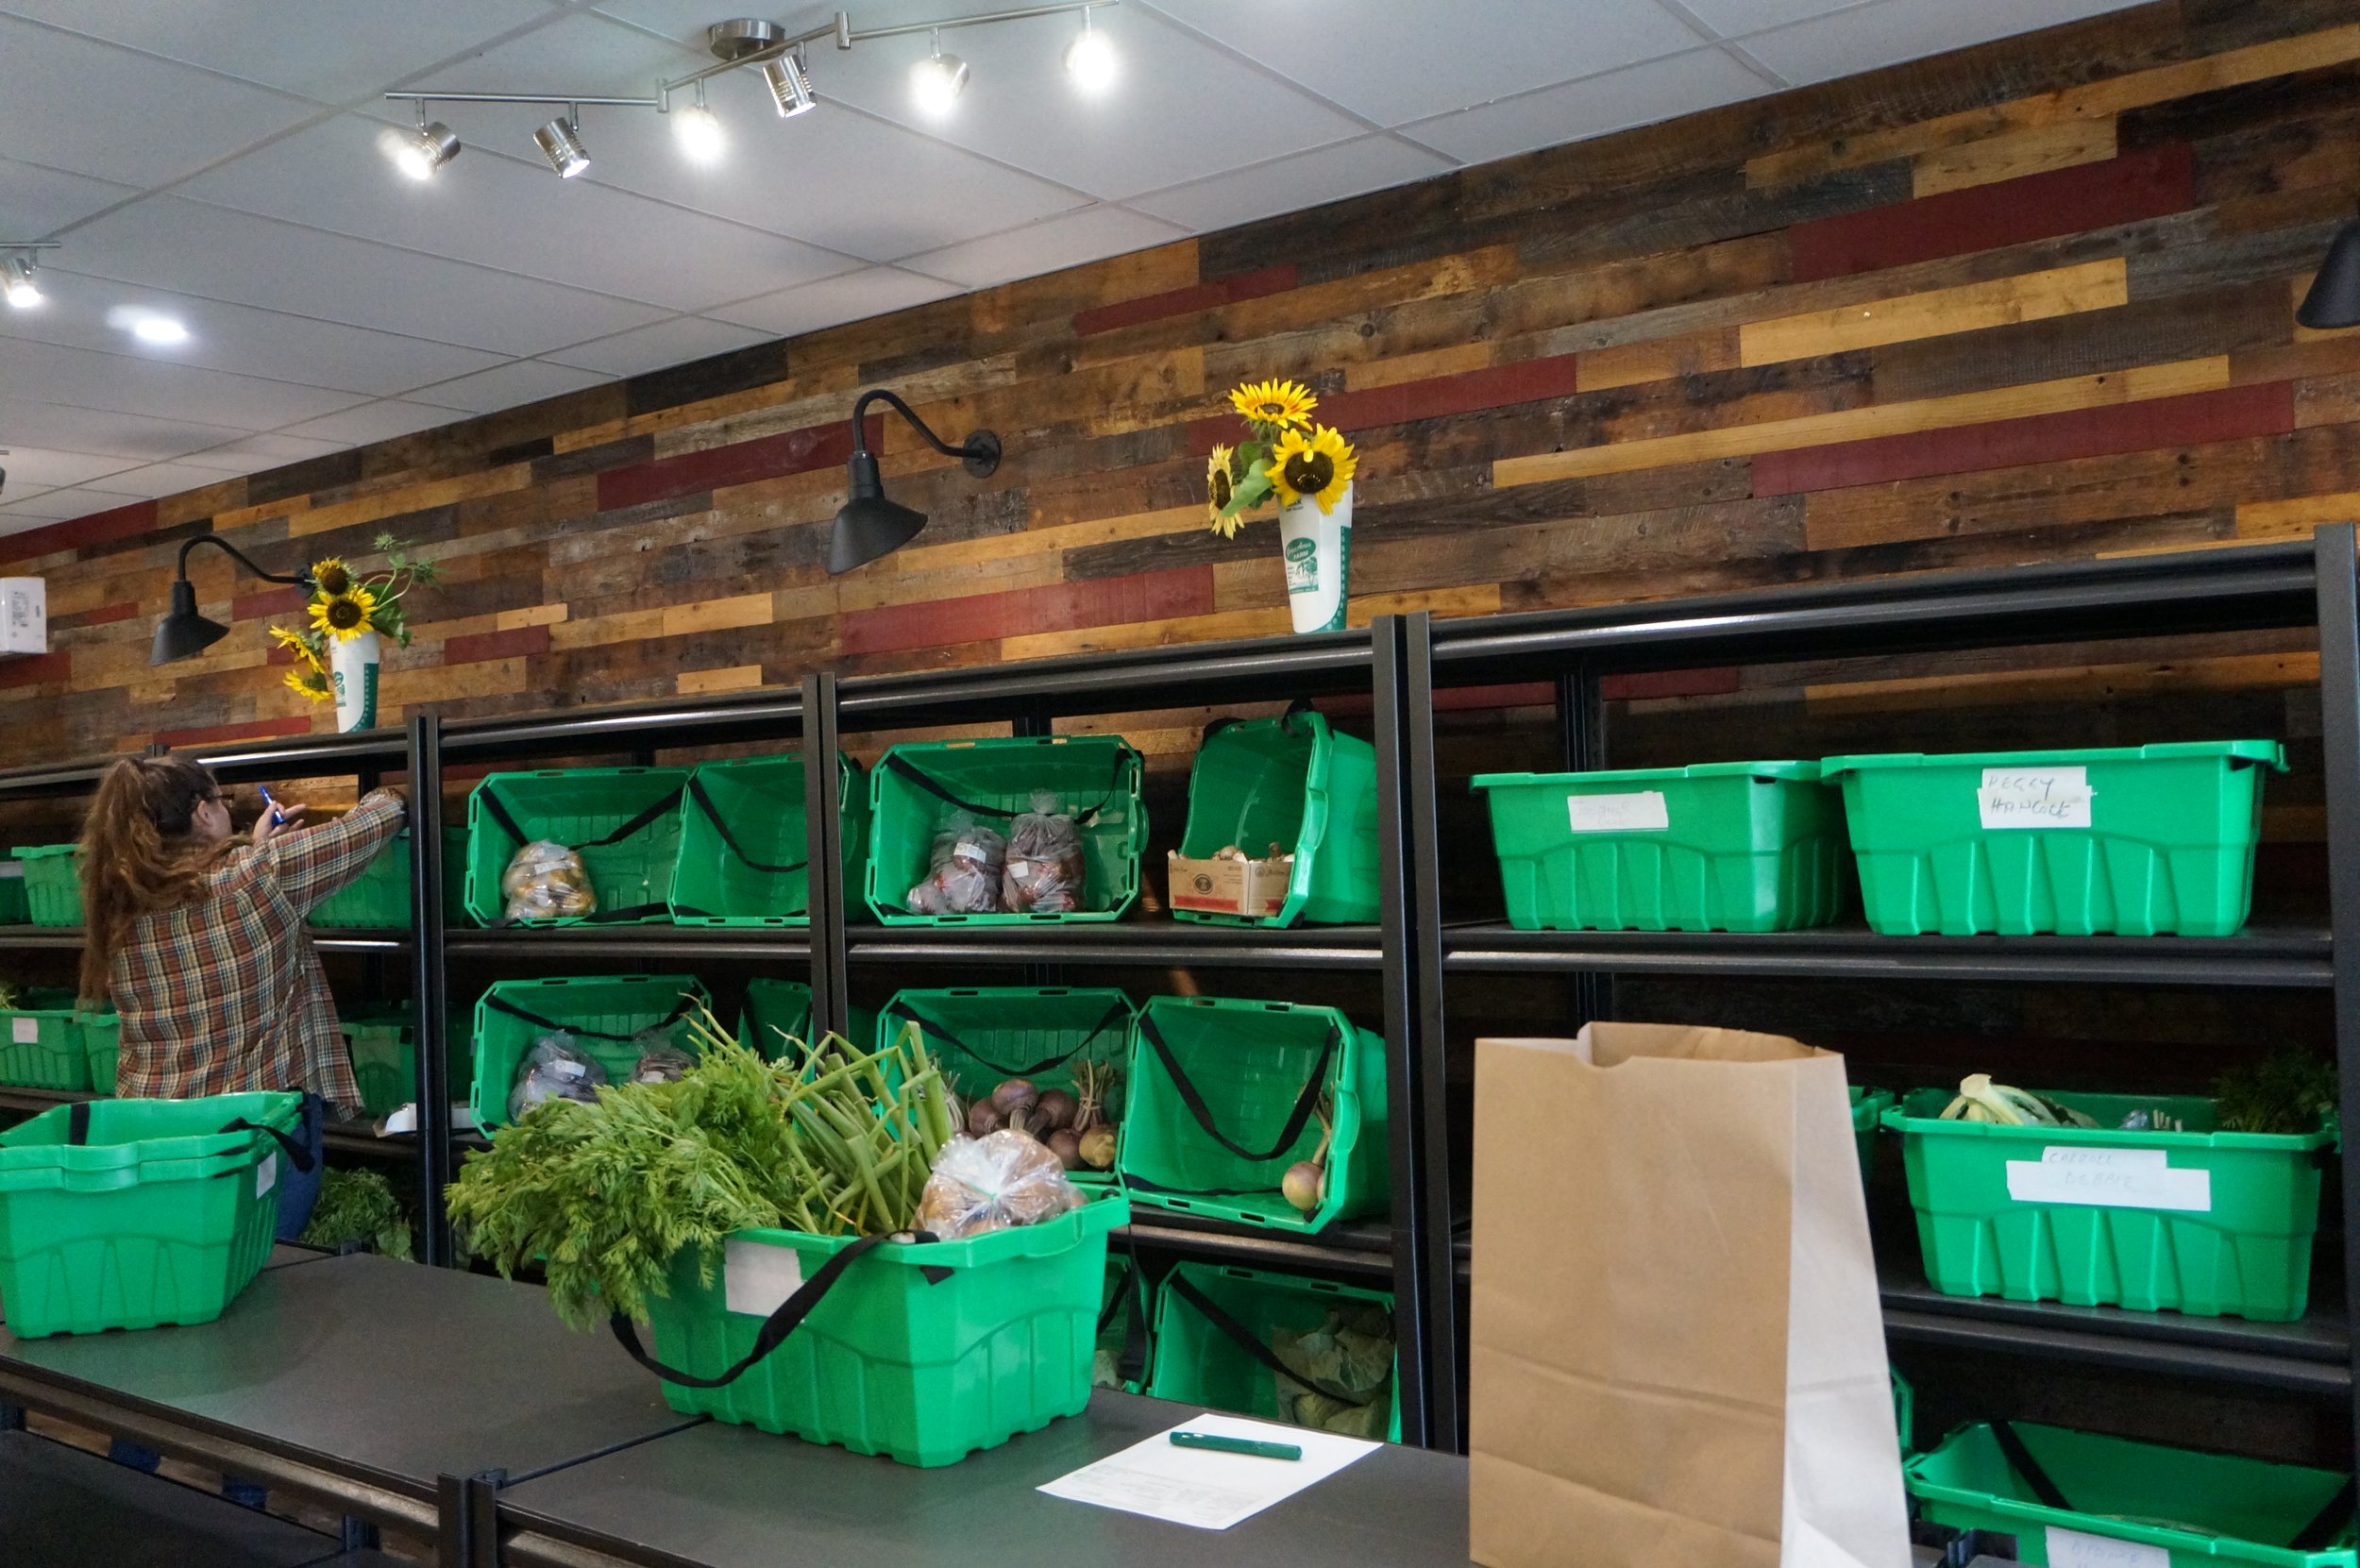  A wall of heavy duty shelving against a wood paneled wall. Each shelf holds two green plastic bins, each a different customer order. One bin is sitting on a counter in front of the shelves, a large paper bag next to it. 